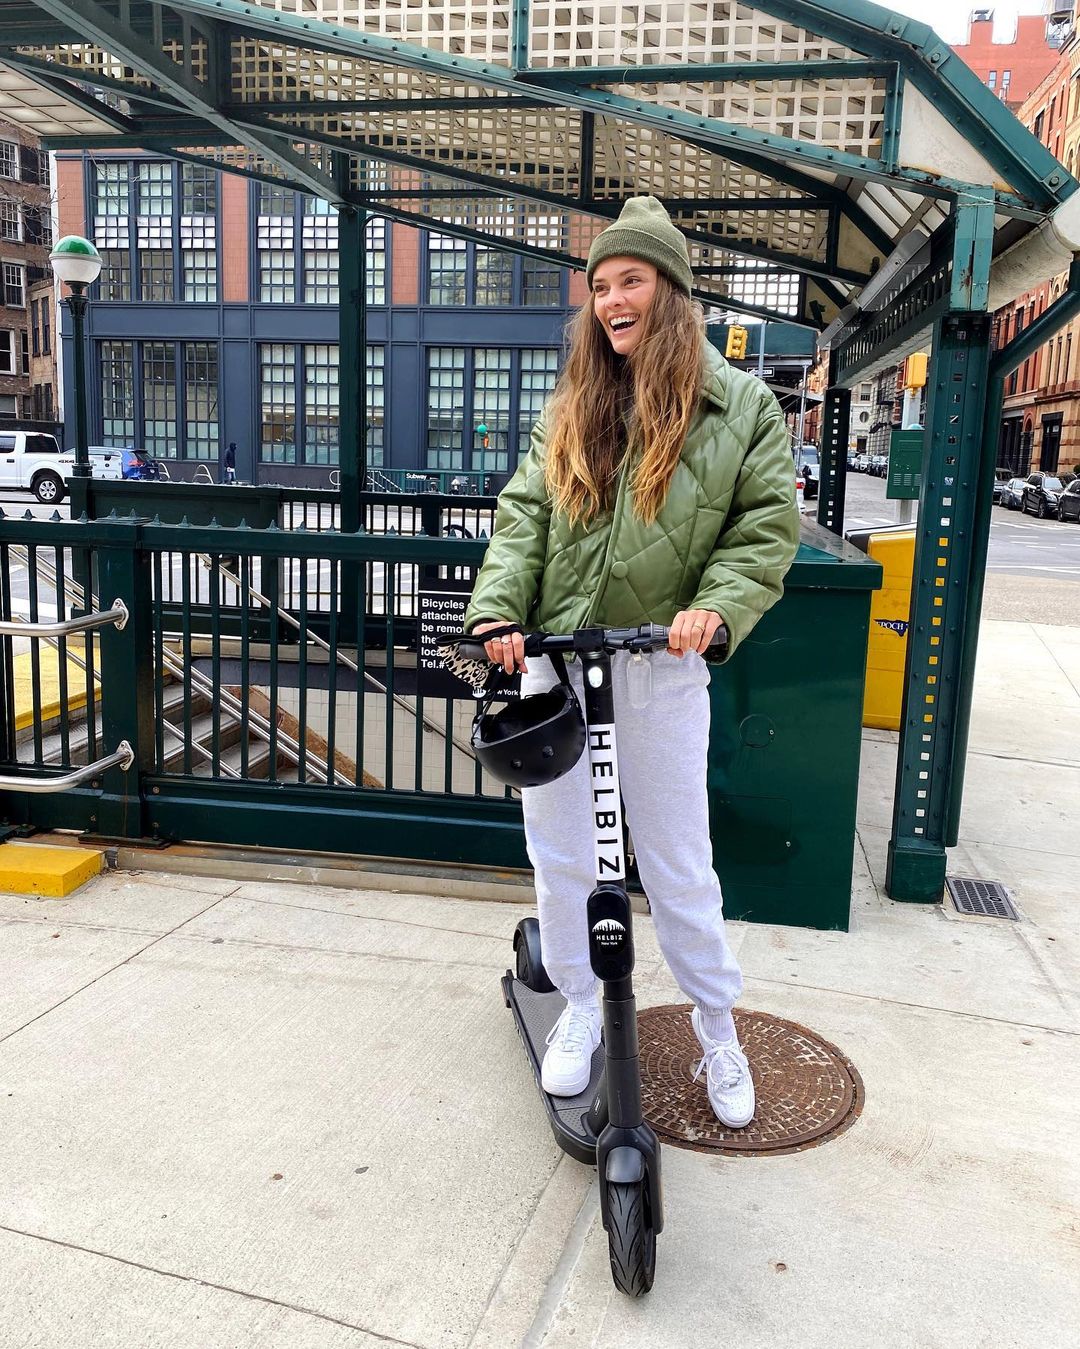 Photos n°5 : Nina Agdal is Back on the Work Commute!